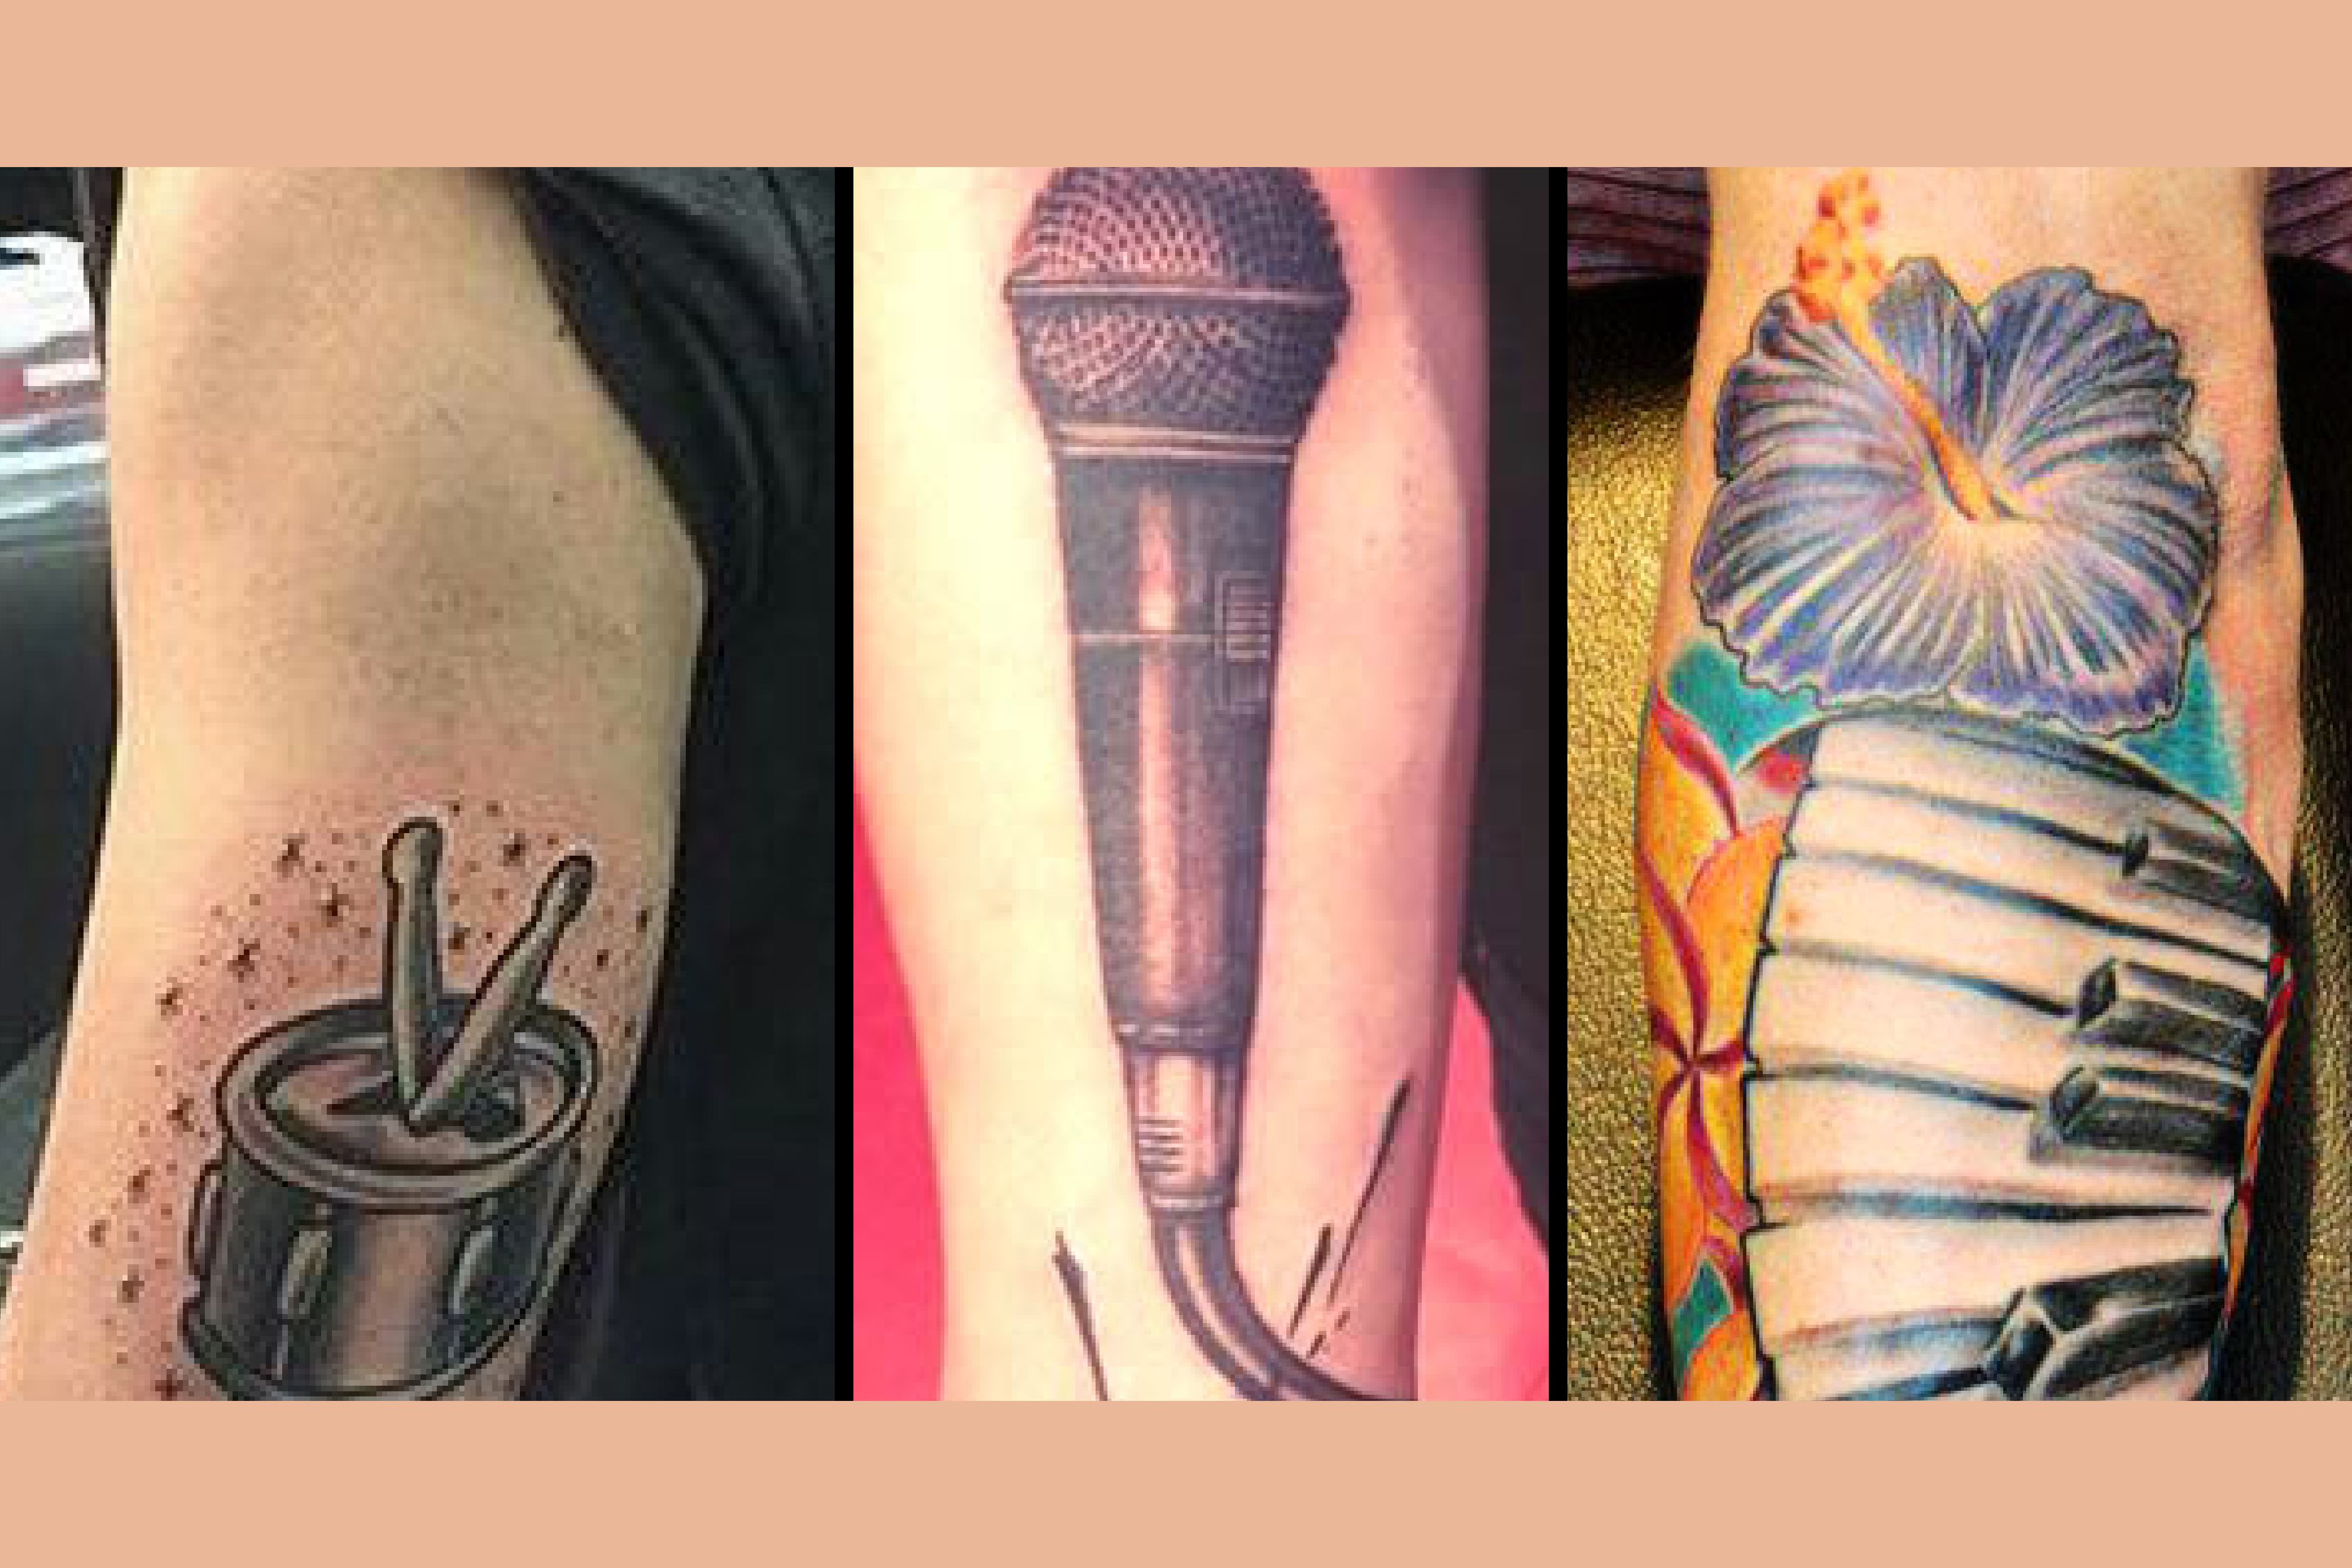 QUIZ: Can You Match These Famous People To Their Musical Tattoo?